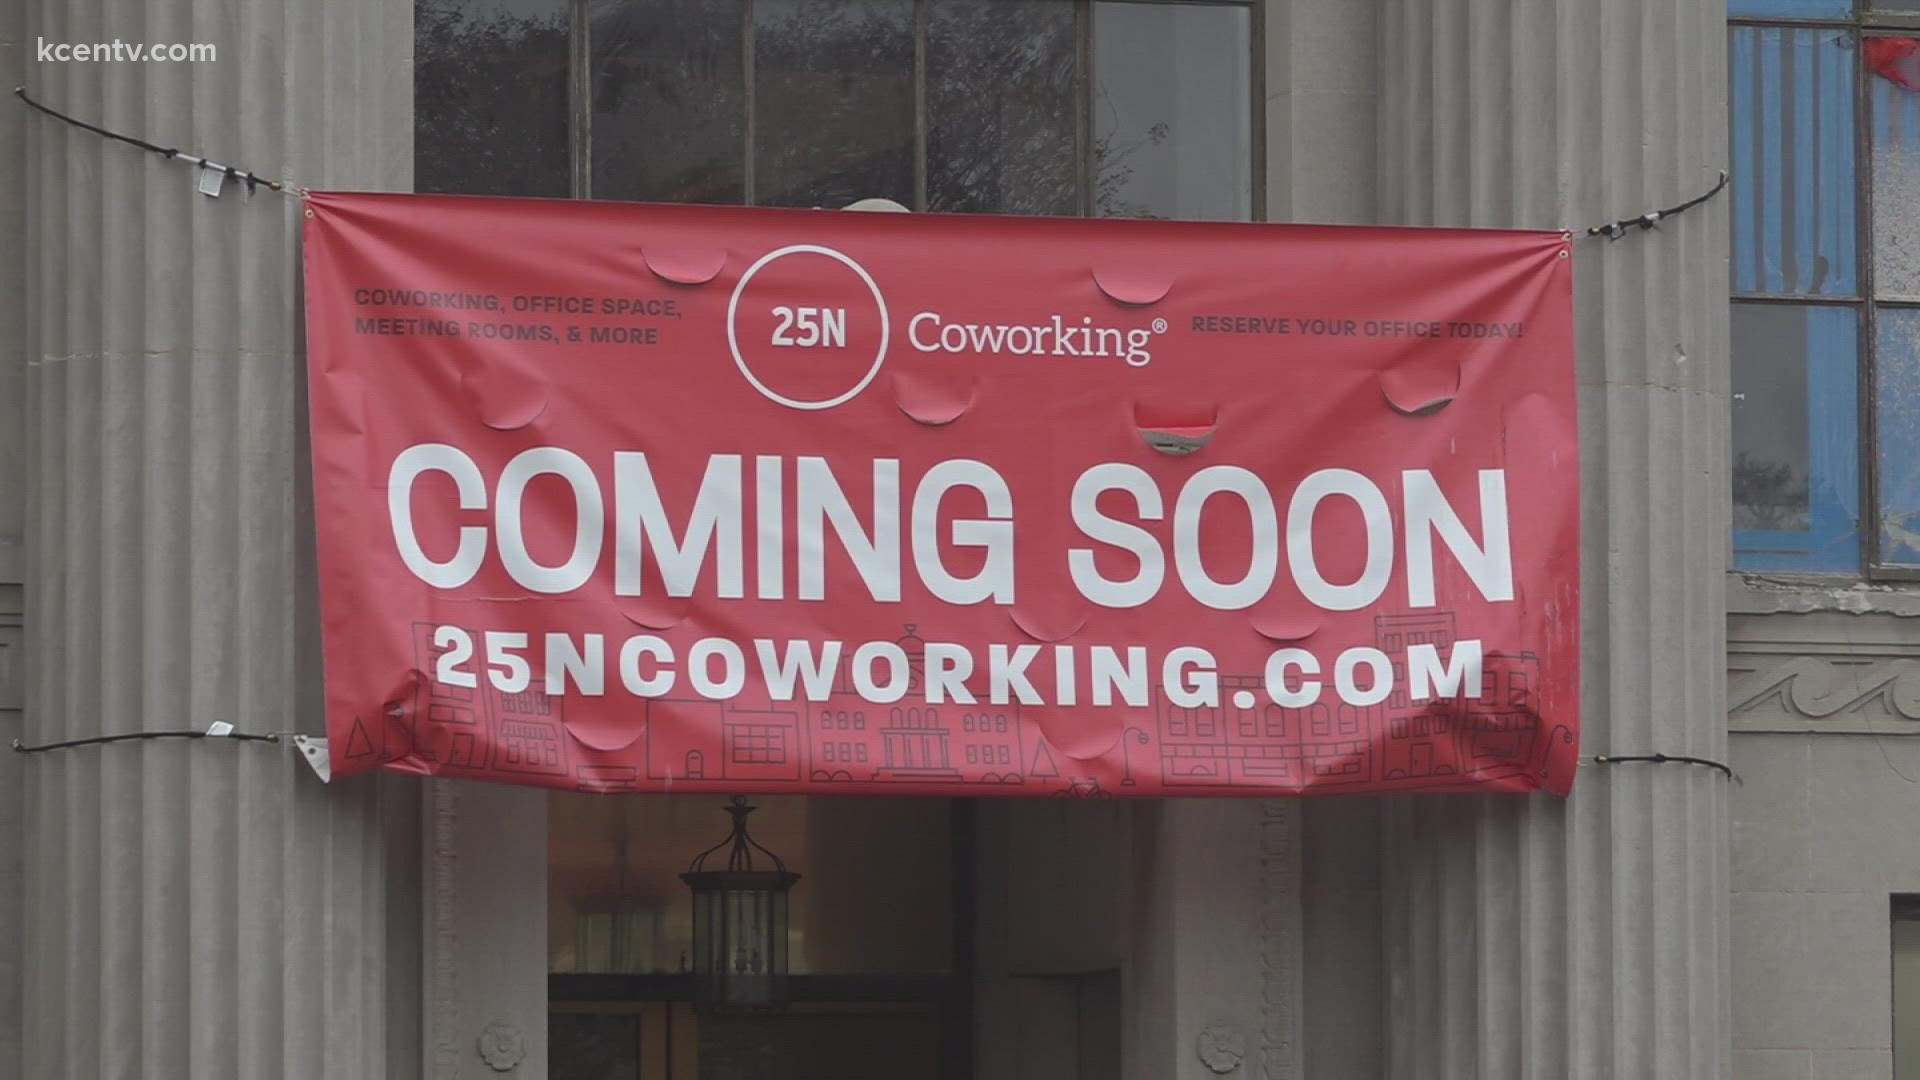 25N Coworking will have flexible workspaces, desks, private offices and meeting rooms. Tours are available now.